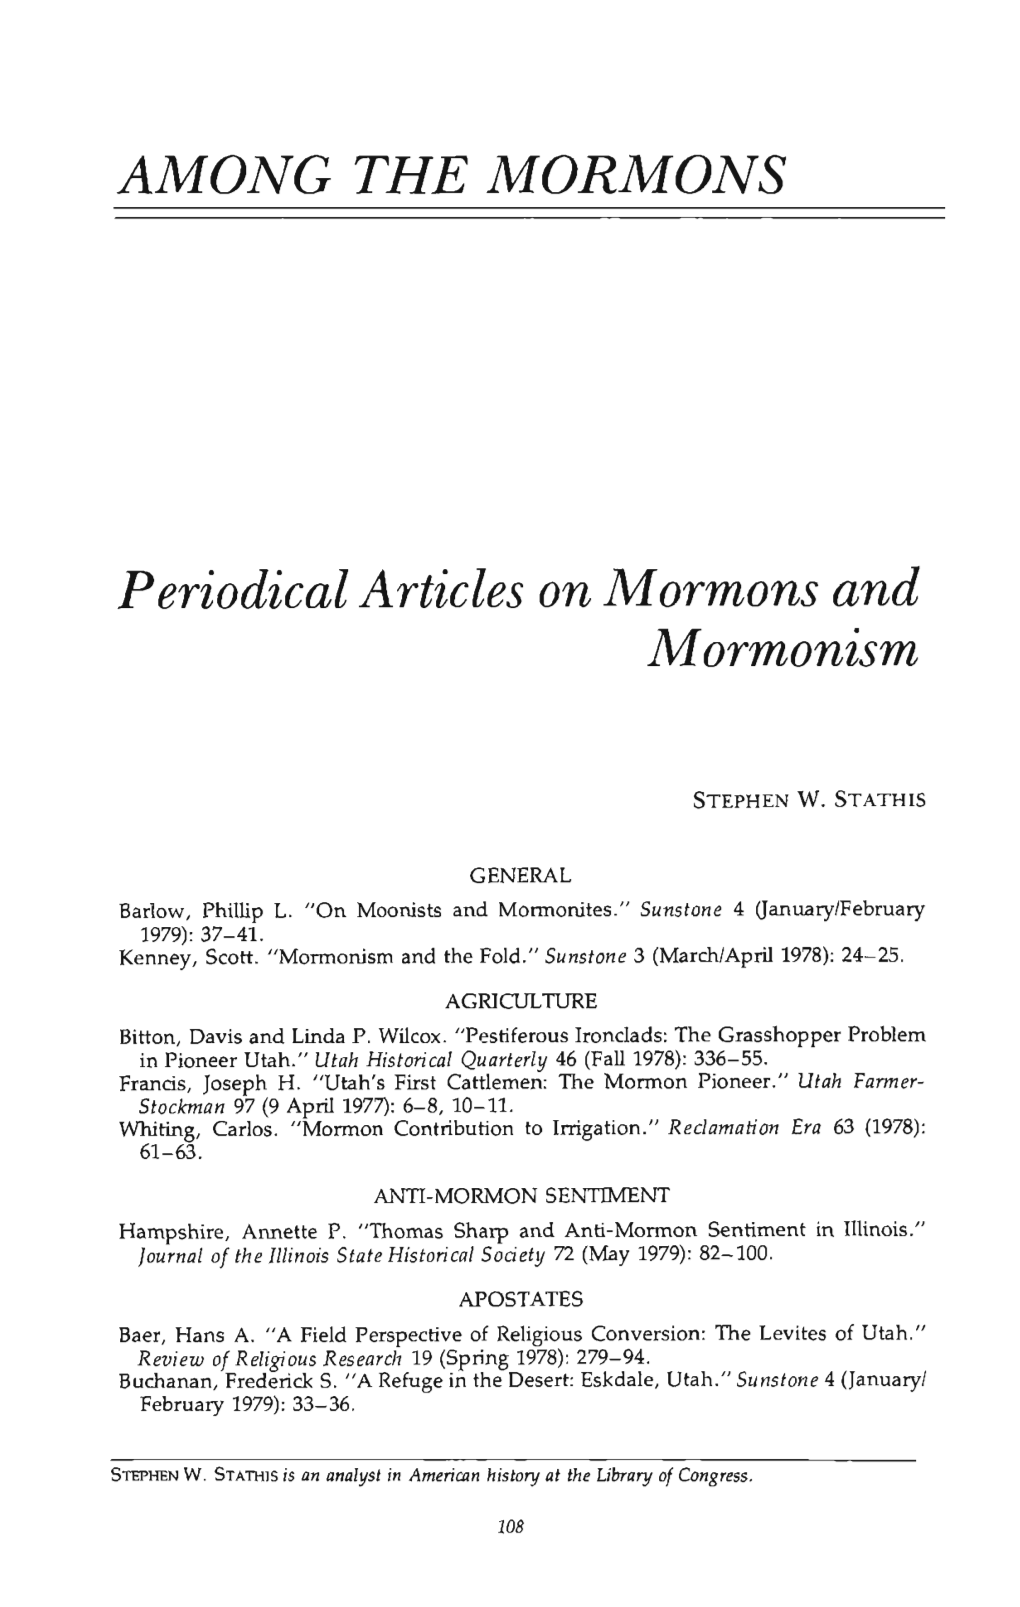 AMONG the MORMONS Periodical Articles on Mormons and Mormonism